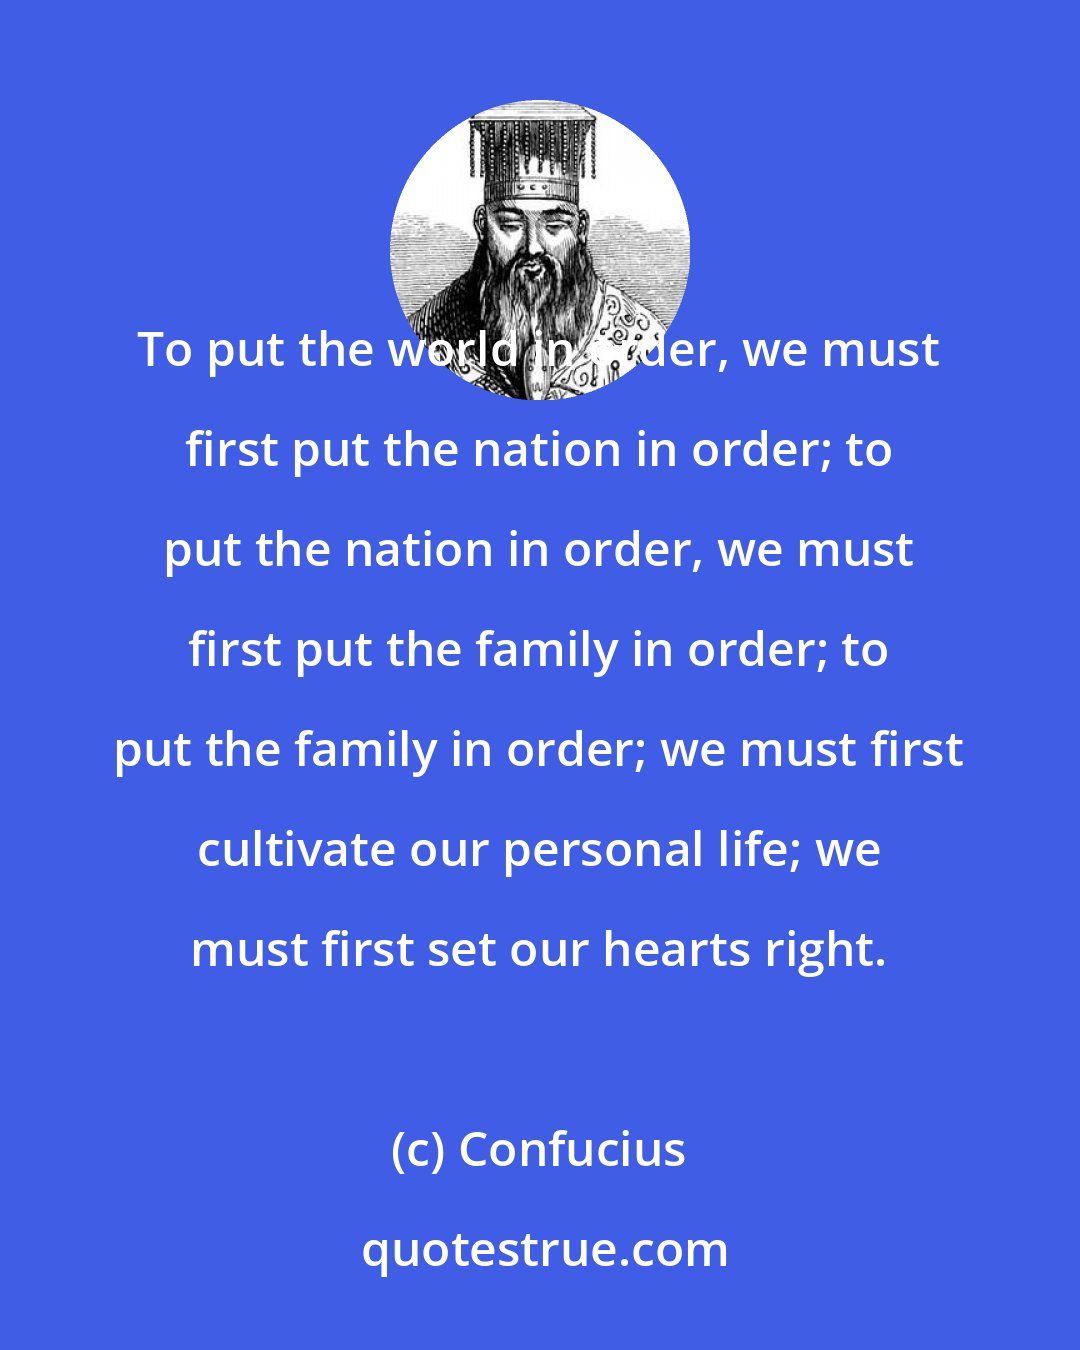 Confucius: To put the world in order, we must first put the nation in order; to put the nation in order, we must first put the family in order; to put the family in order; we must first cultivate our personal life; we must first set our hearts right.